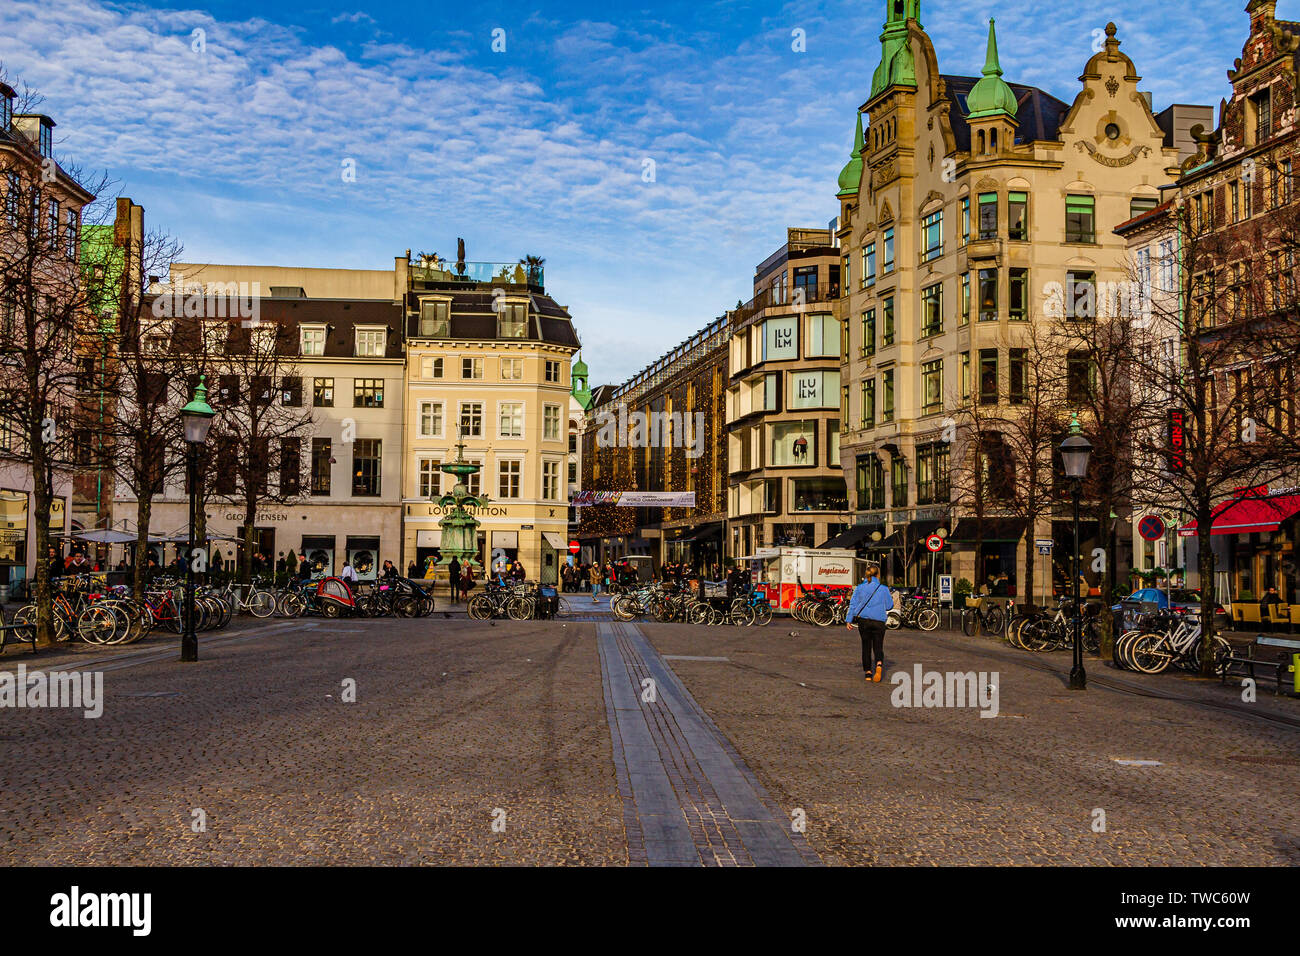 Amagertorv, a square at the centre of the Stroget pedestrianised area on a quiet winter day. Copenhagen, Denmark. January 2019. Stock Photo